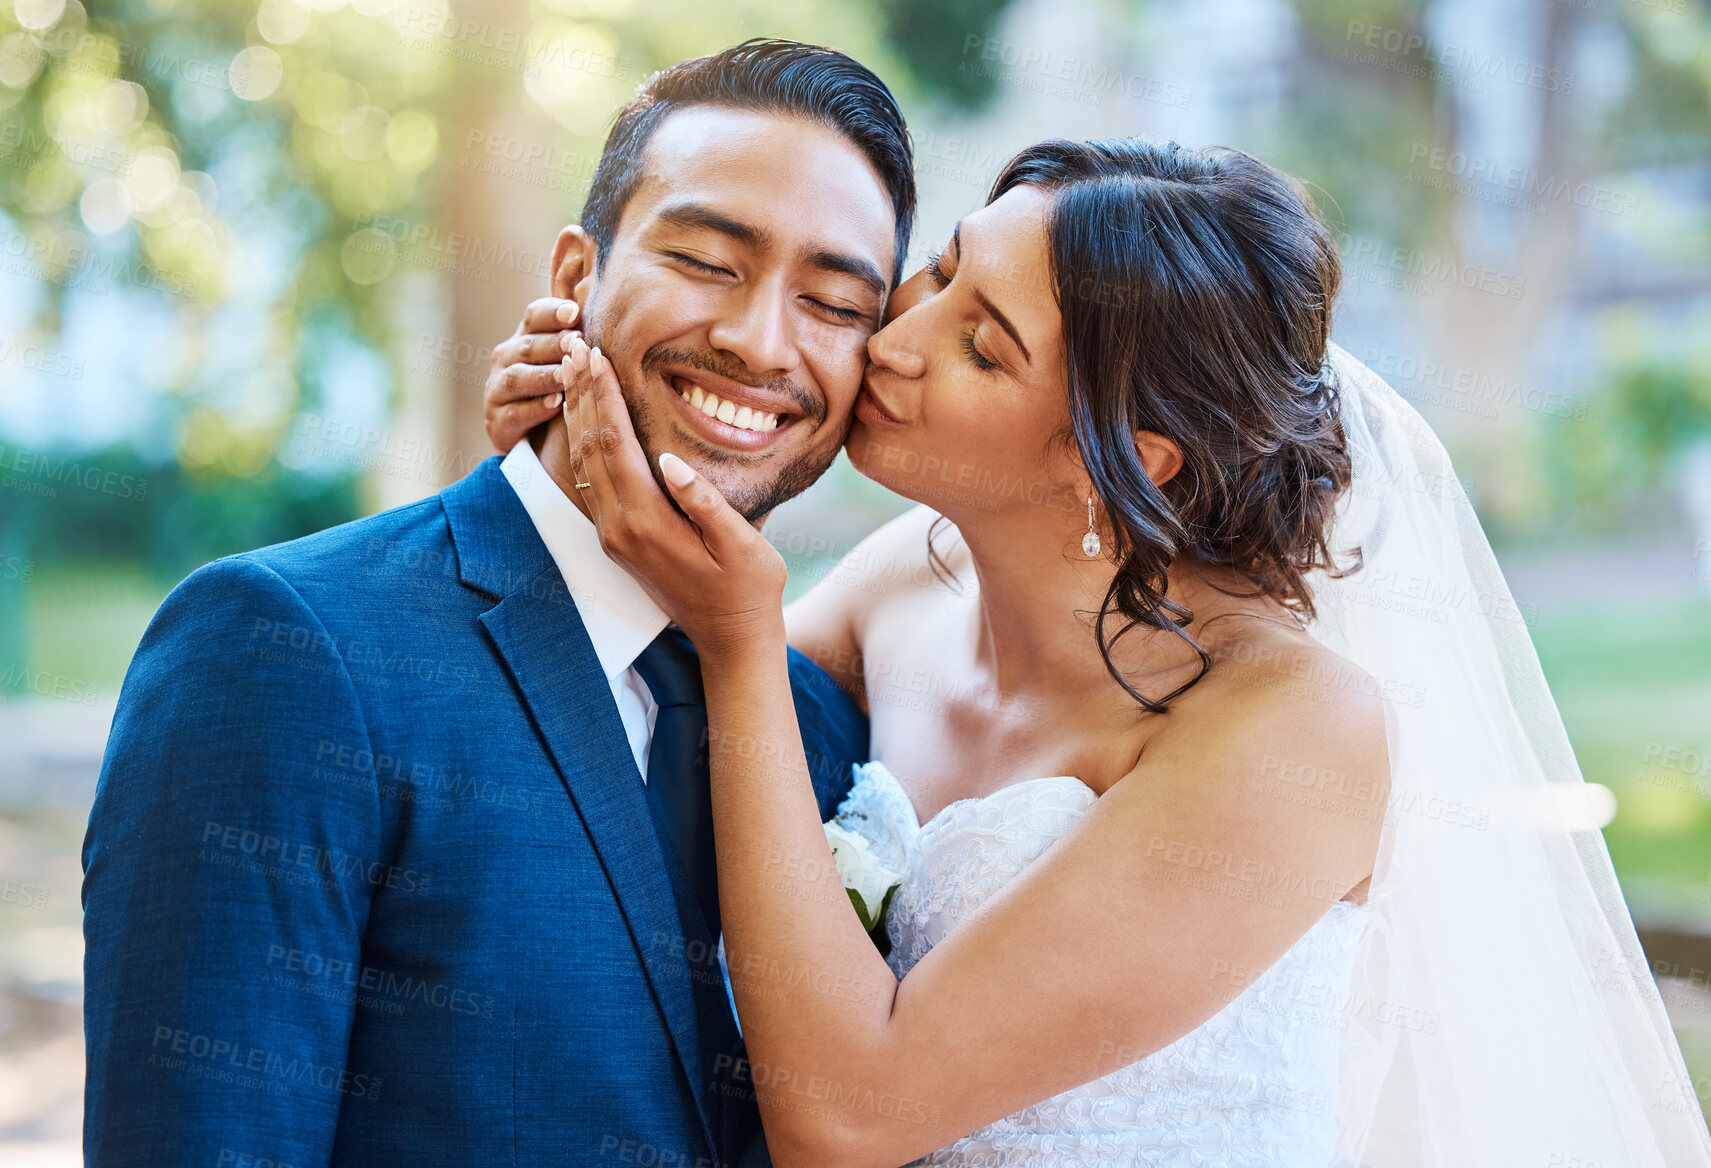 Buy stock photo Beautiful bride kissing her groom on the cheek. Happy loving newlyweds enjoying romantic moments on their wedding day in nature